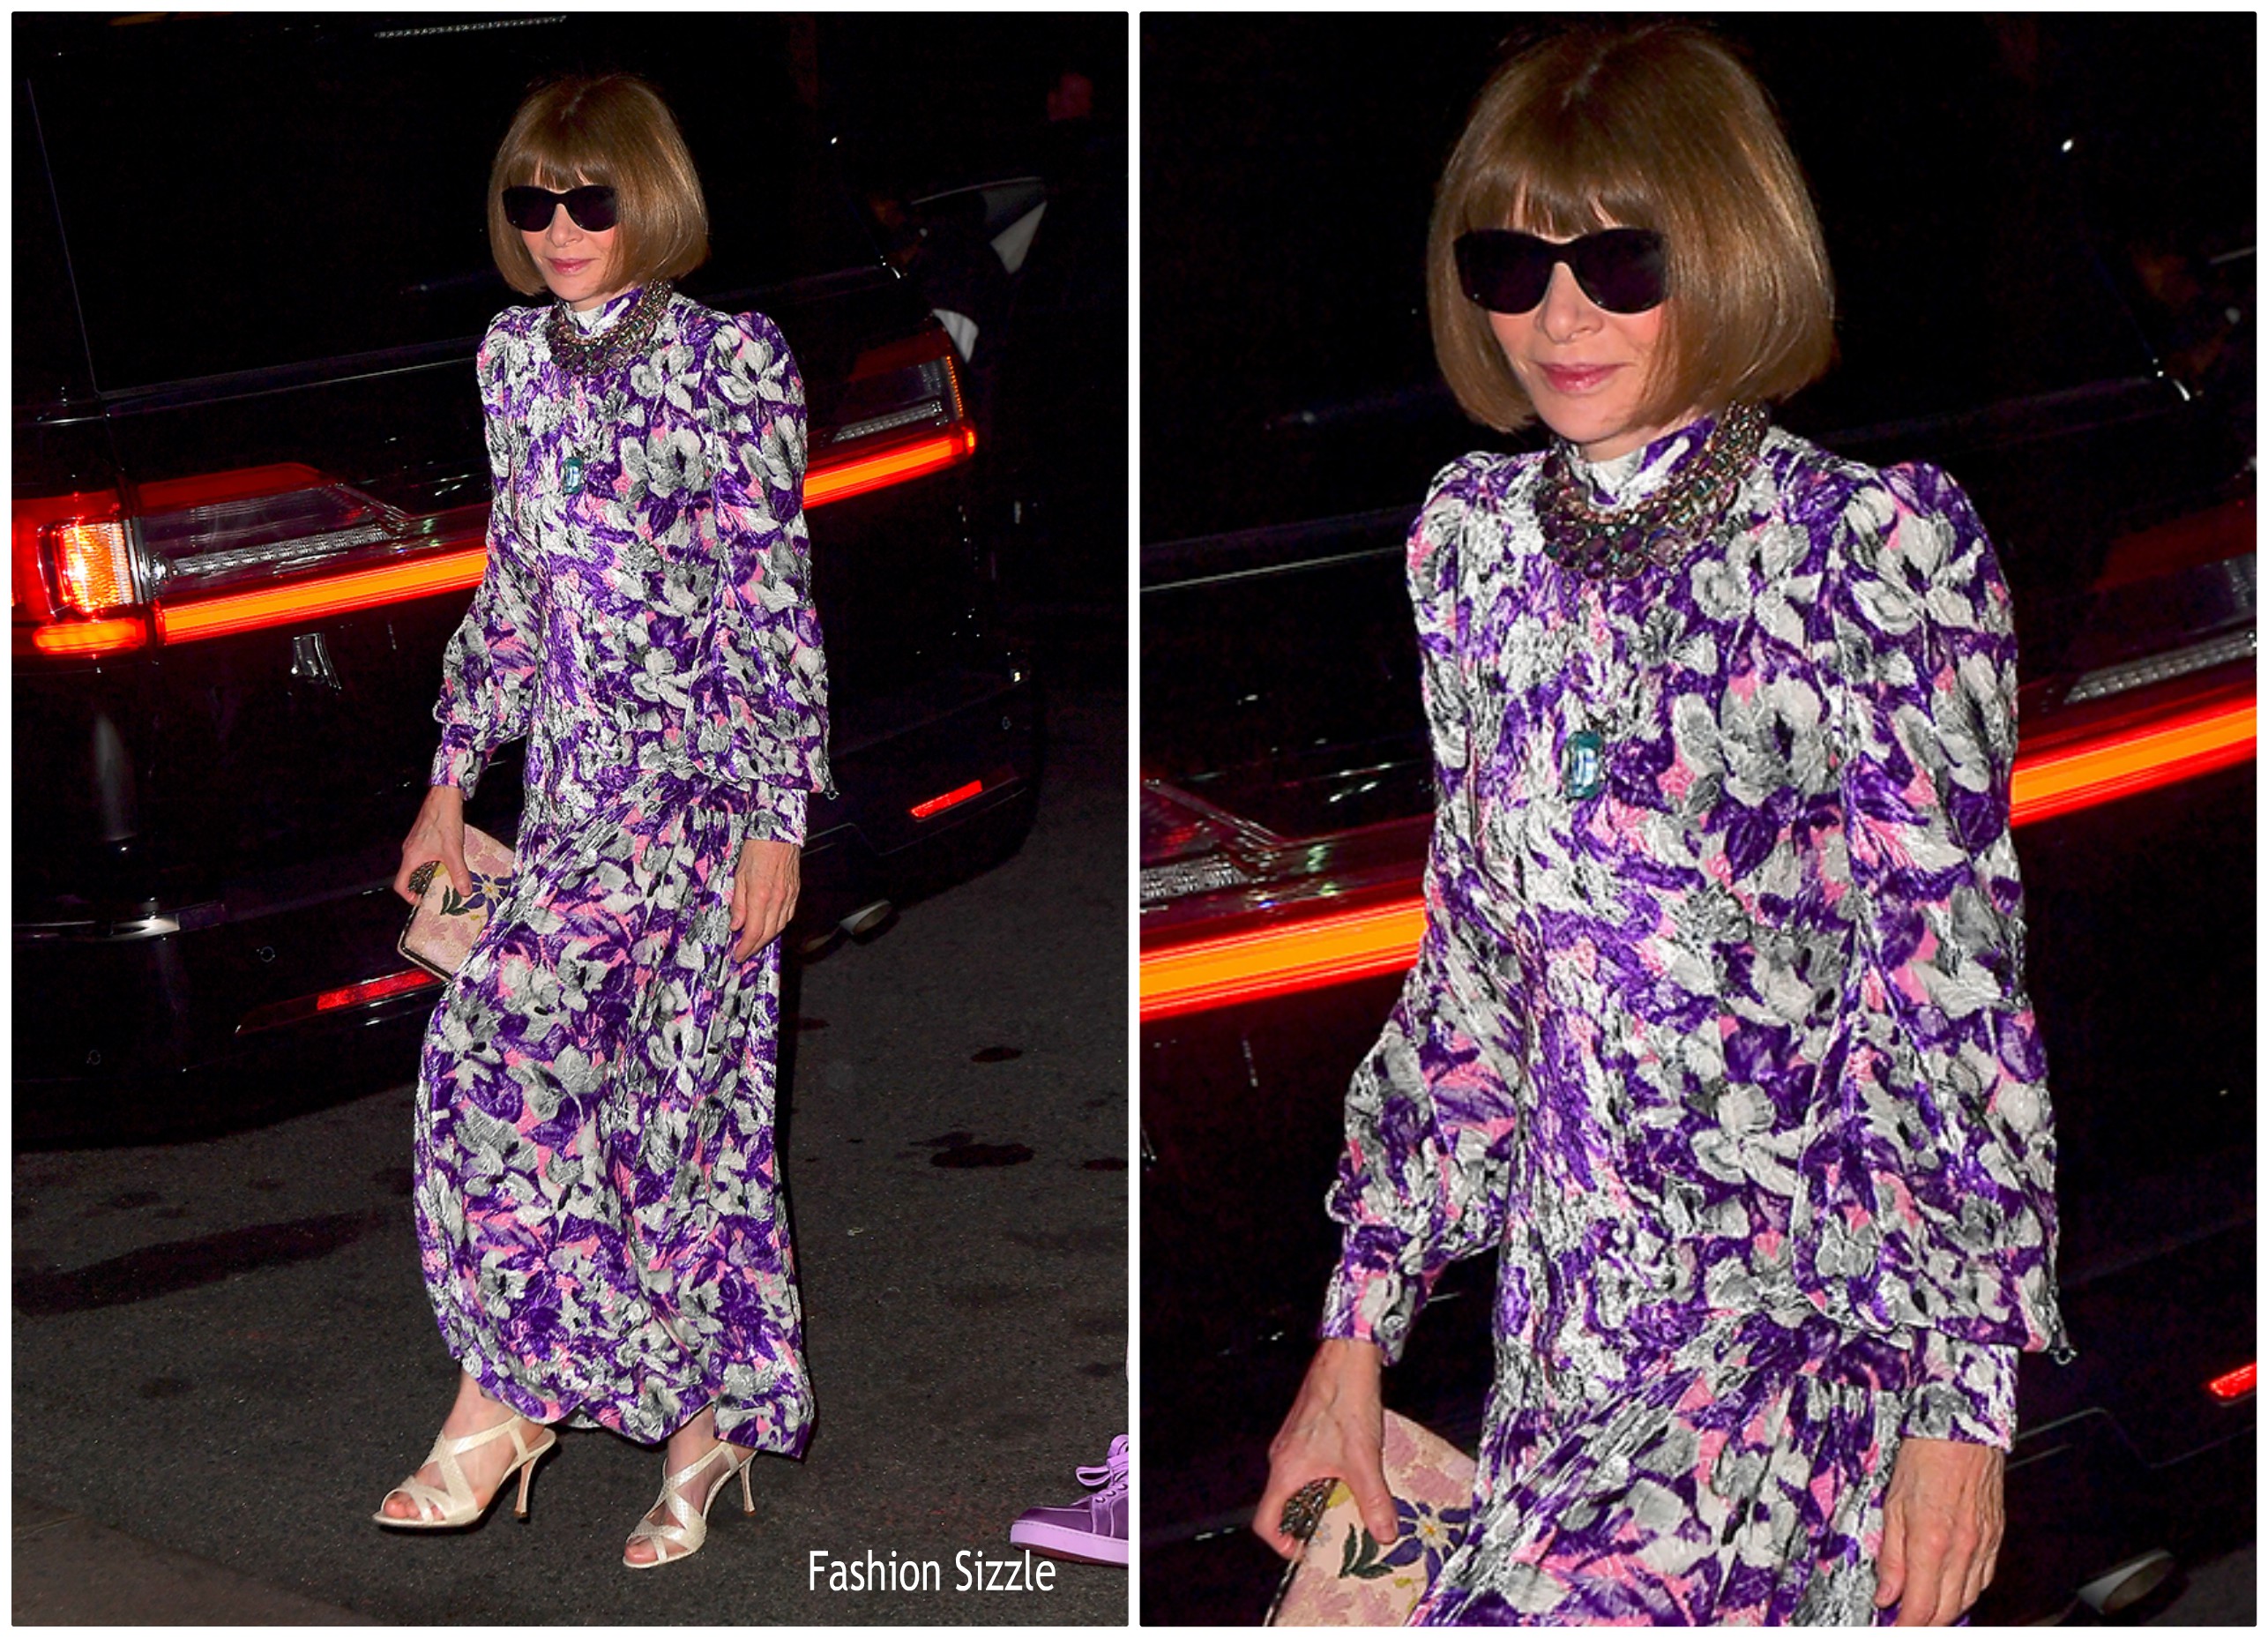 Anna Wintour  in Floral dress @ Marc Jacobs And Char Defrancesco’s Wedding Reception